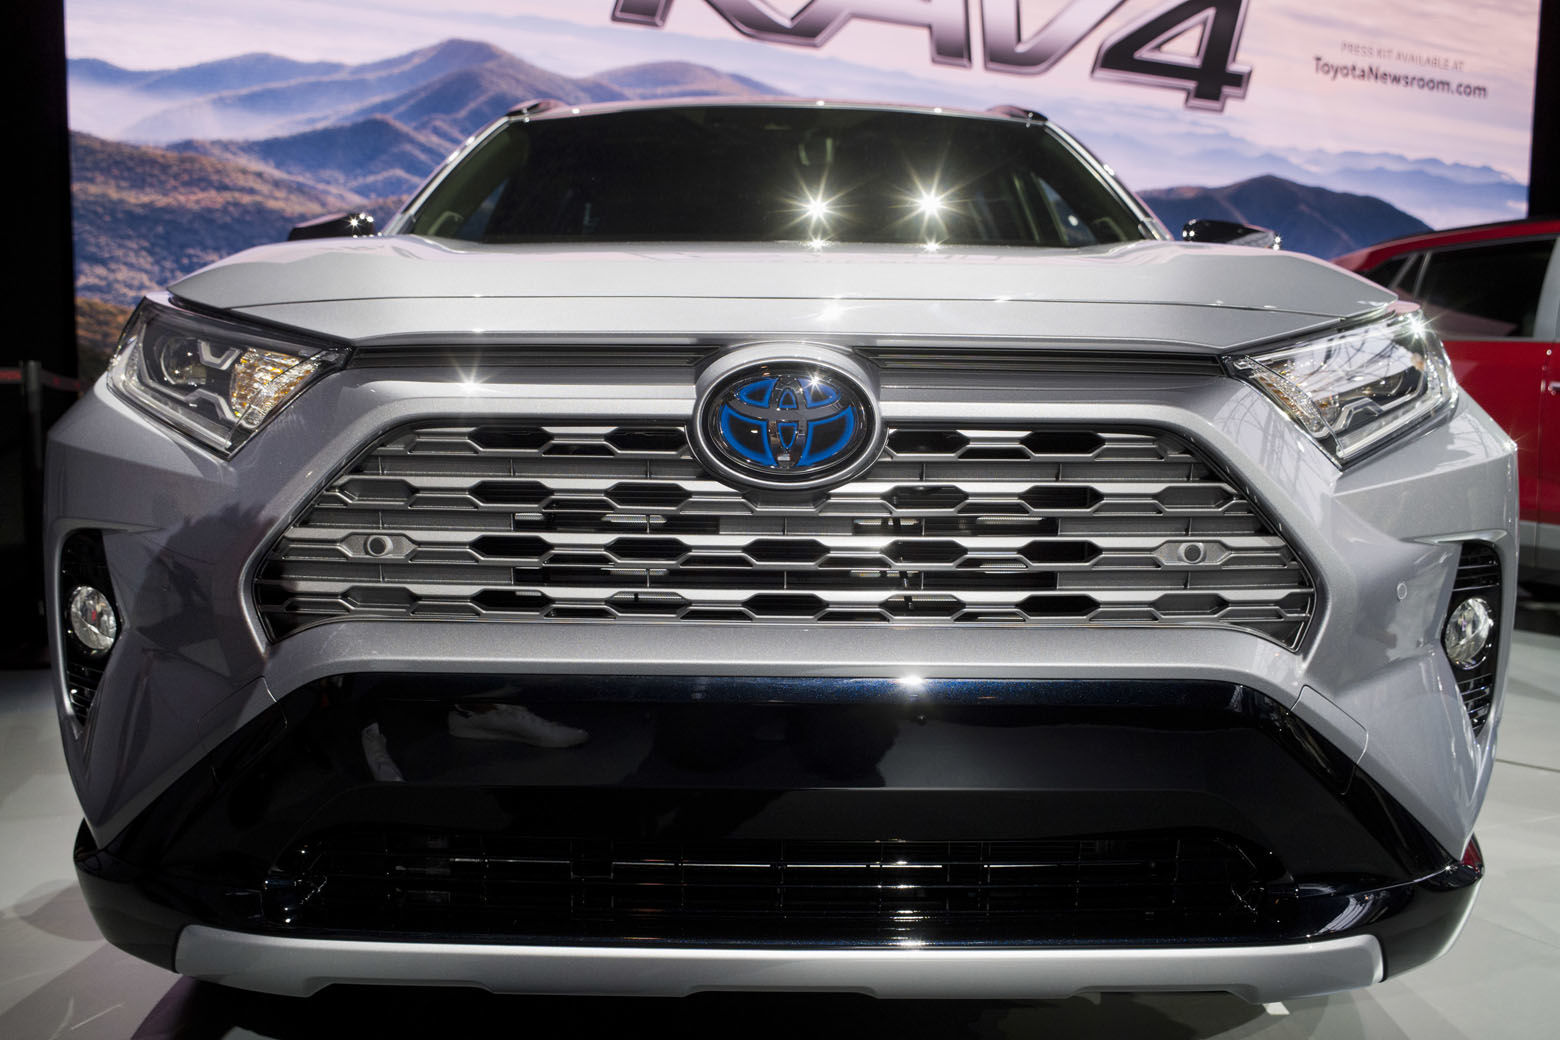 The 2019 Toyota Rav4 is shown Wednesday, March 28, 2018, at the New York Auto Show. (AP Photo/Mark Lennihan)